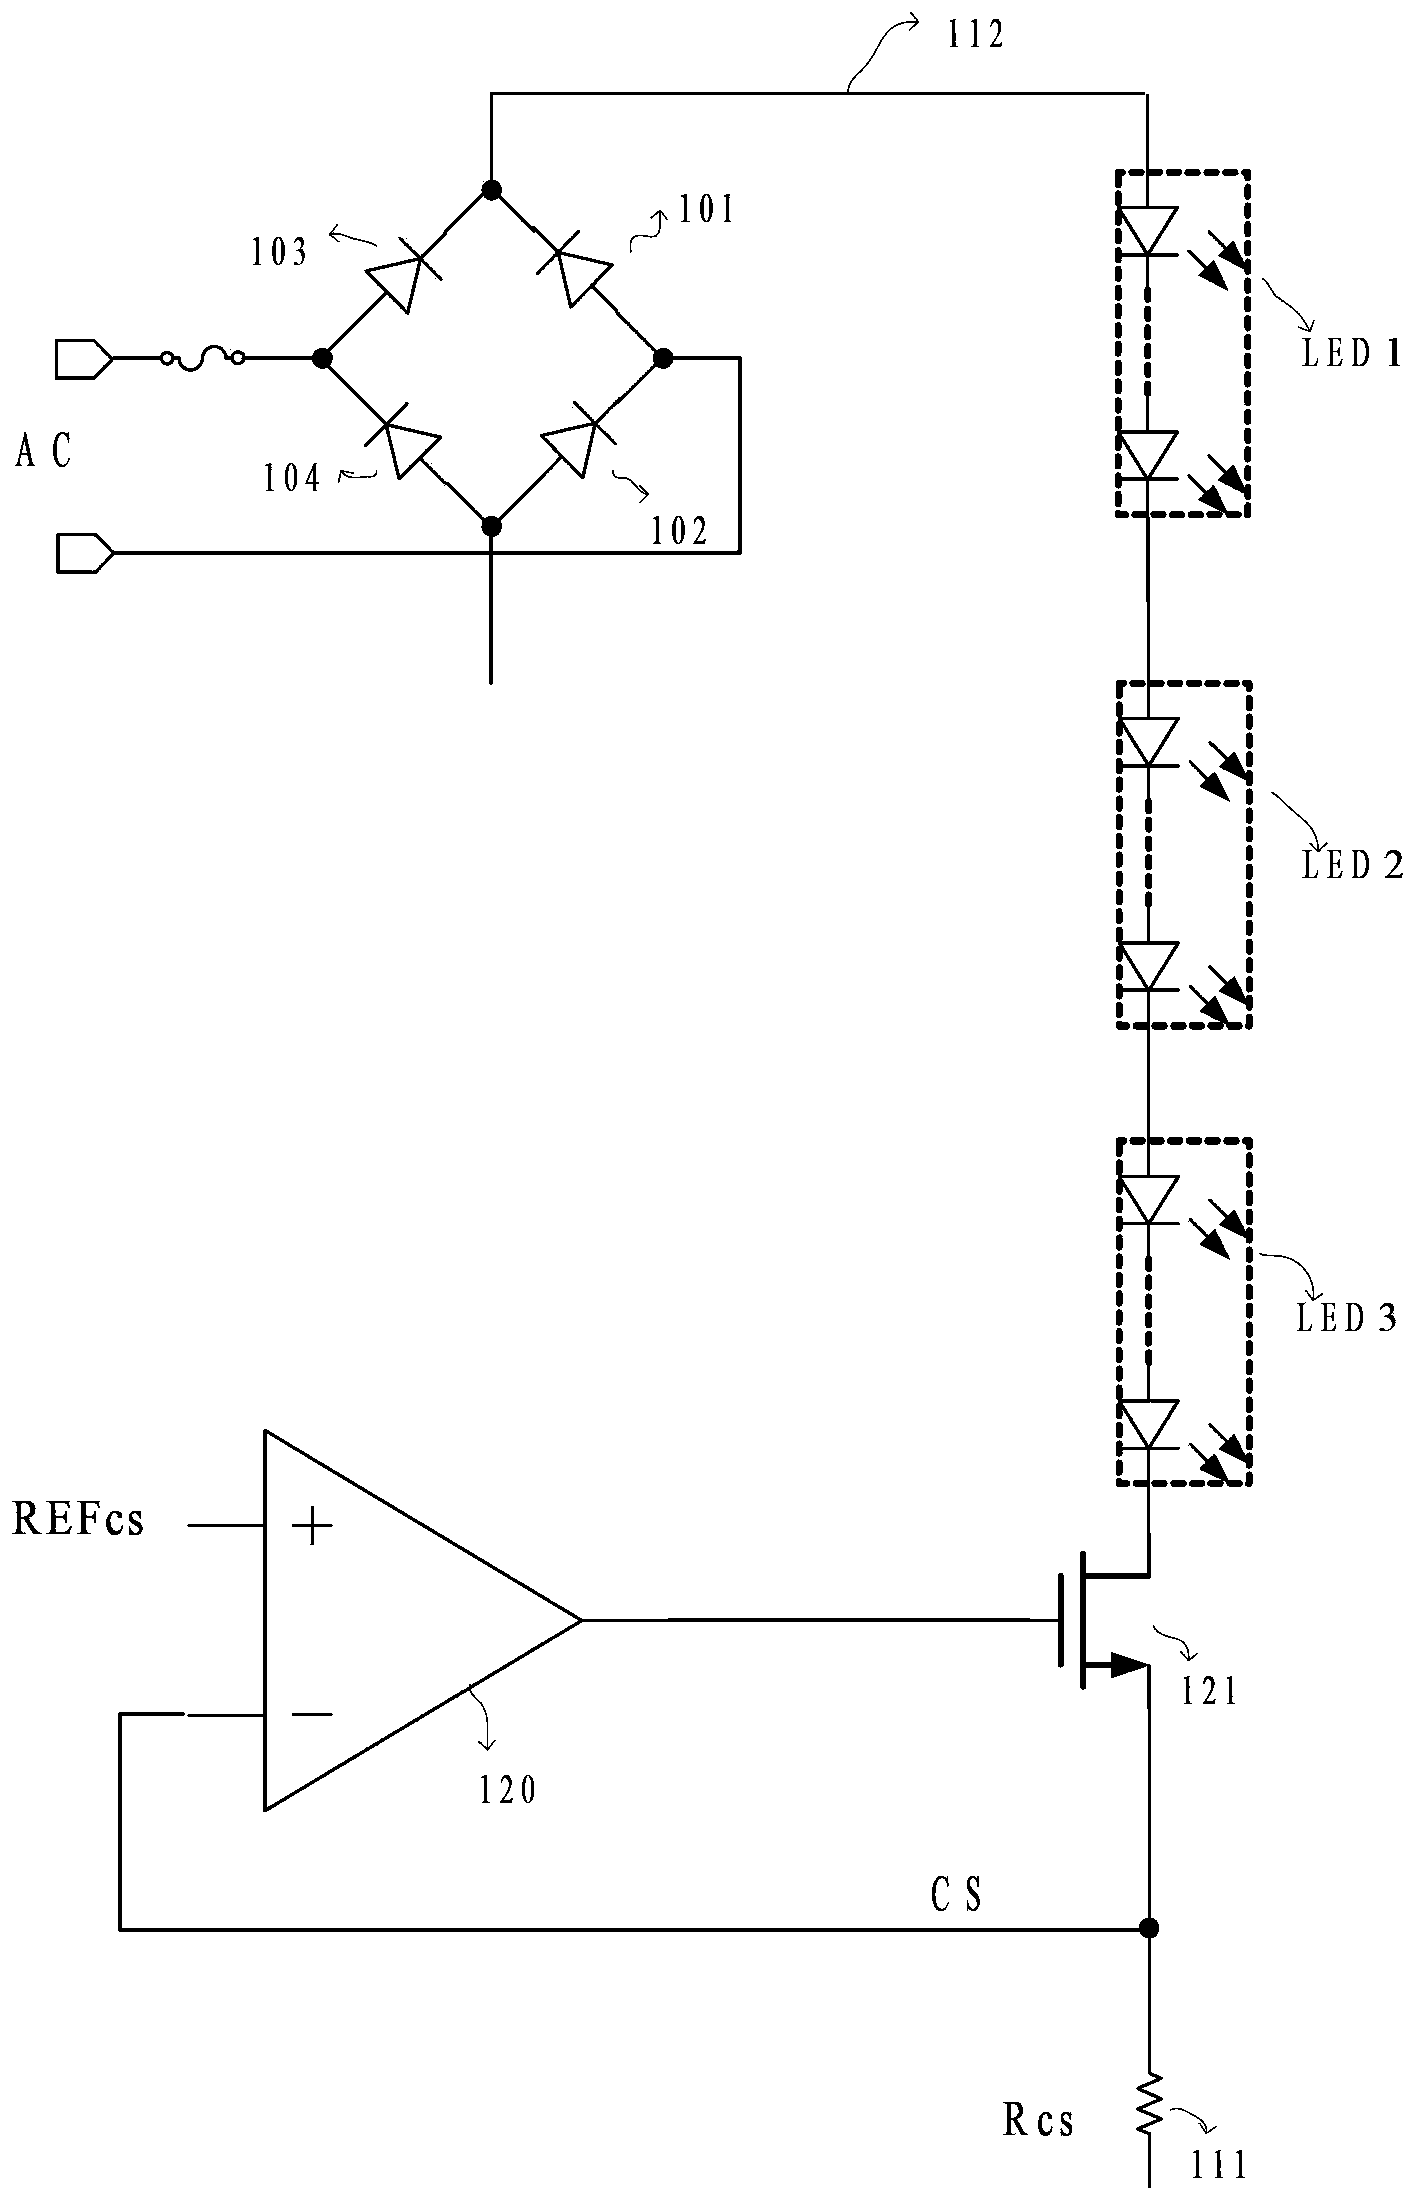 Non-overshoot LED linear constant current drive circuit